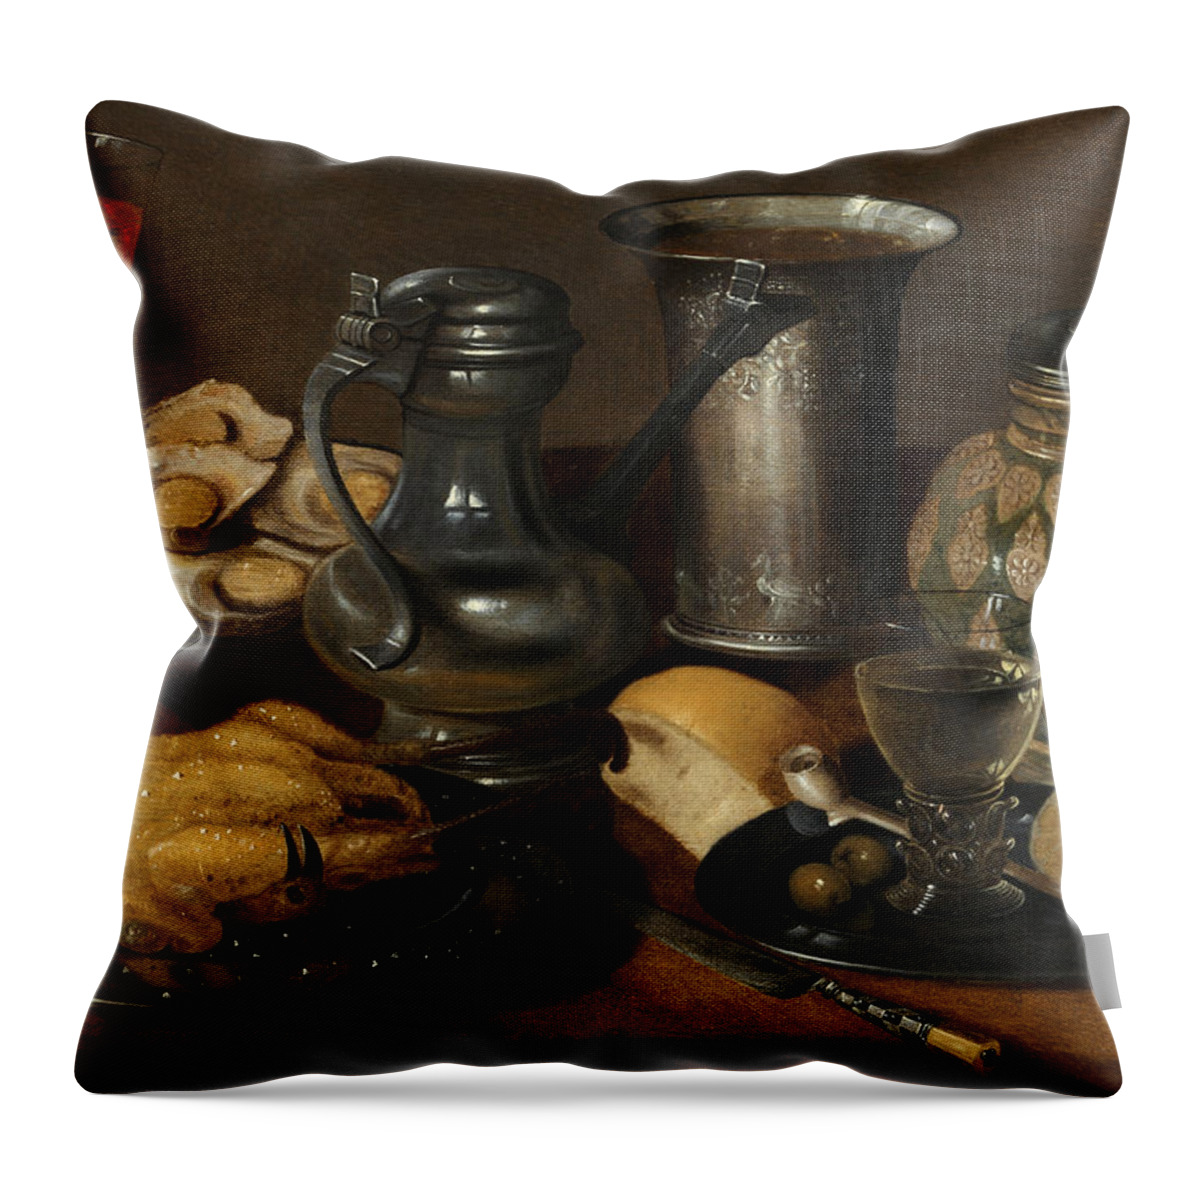 Master Hanauer School Throw Pillow featuring the painting Still life by Master Hanauer school of the 17th century